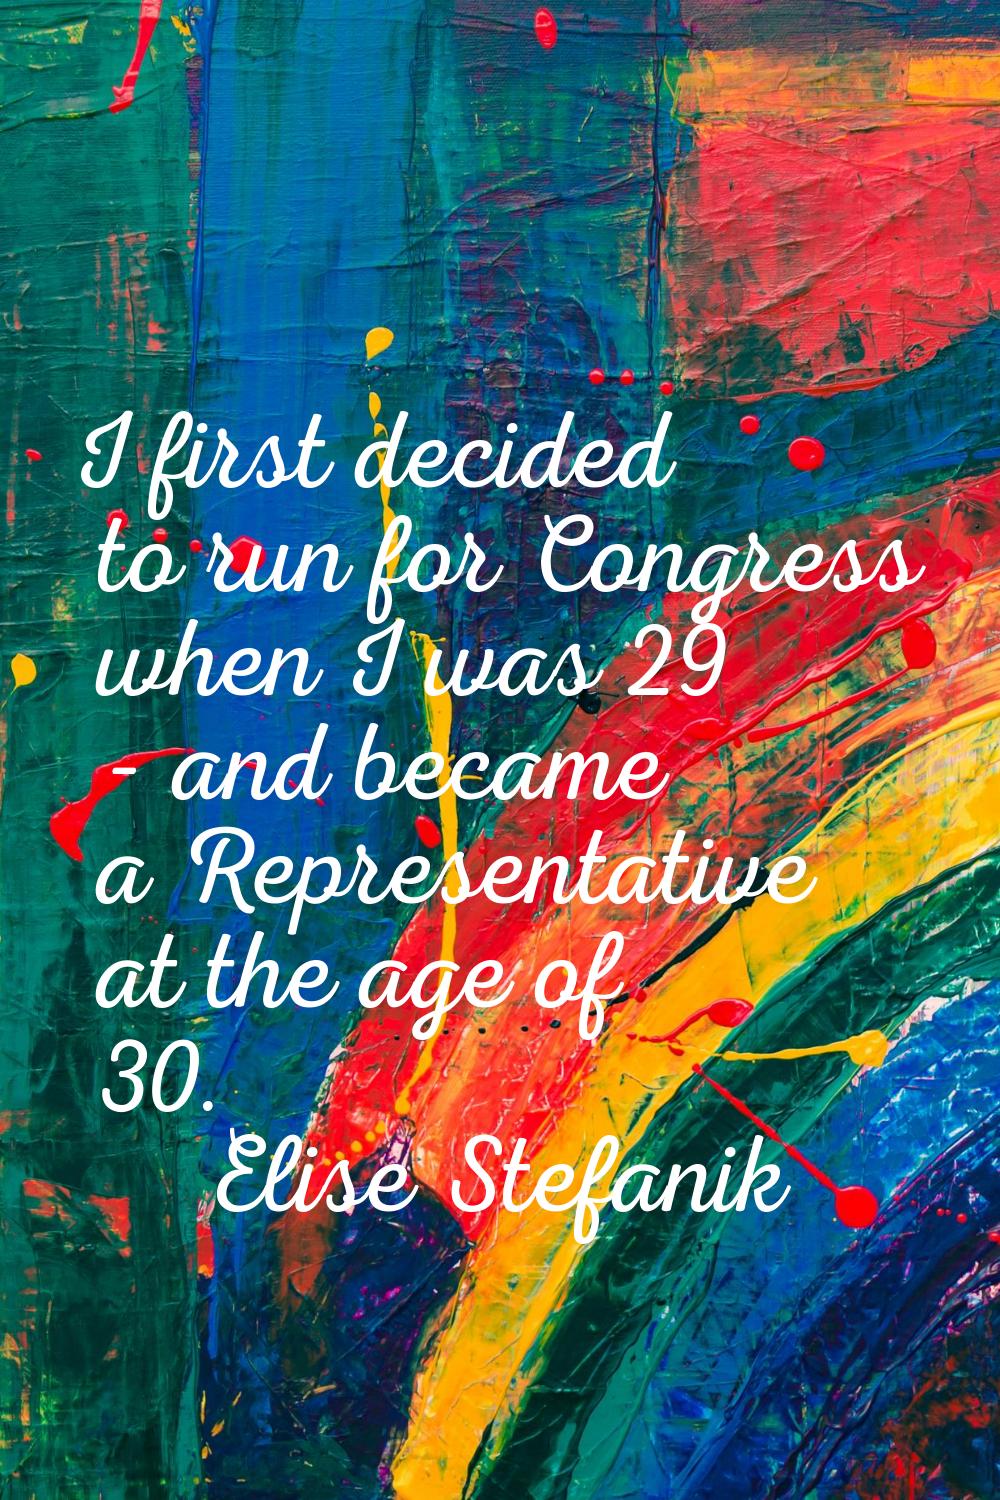 I first decided to run for Congress when I was 29 - and became a Representative at the age of 30.